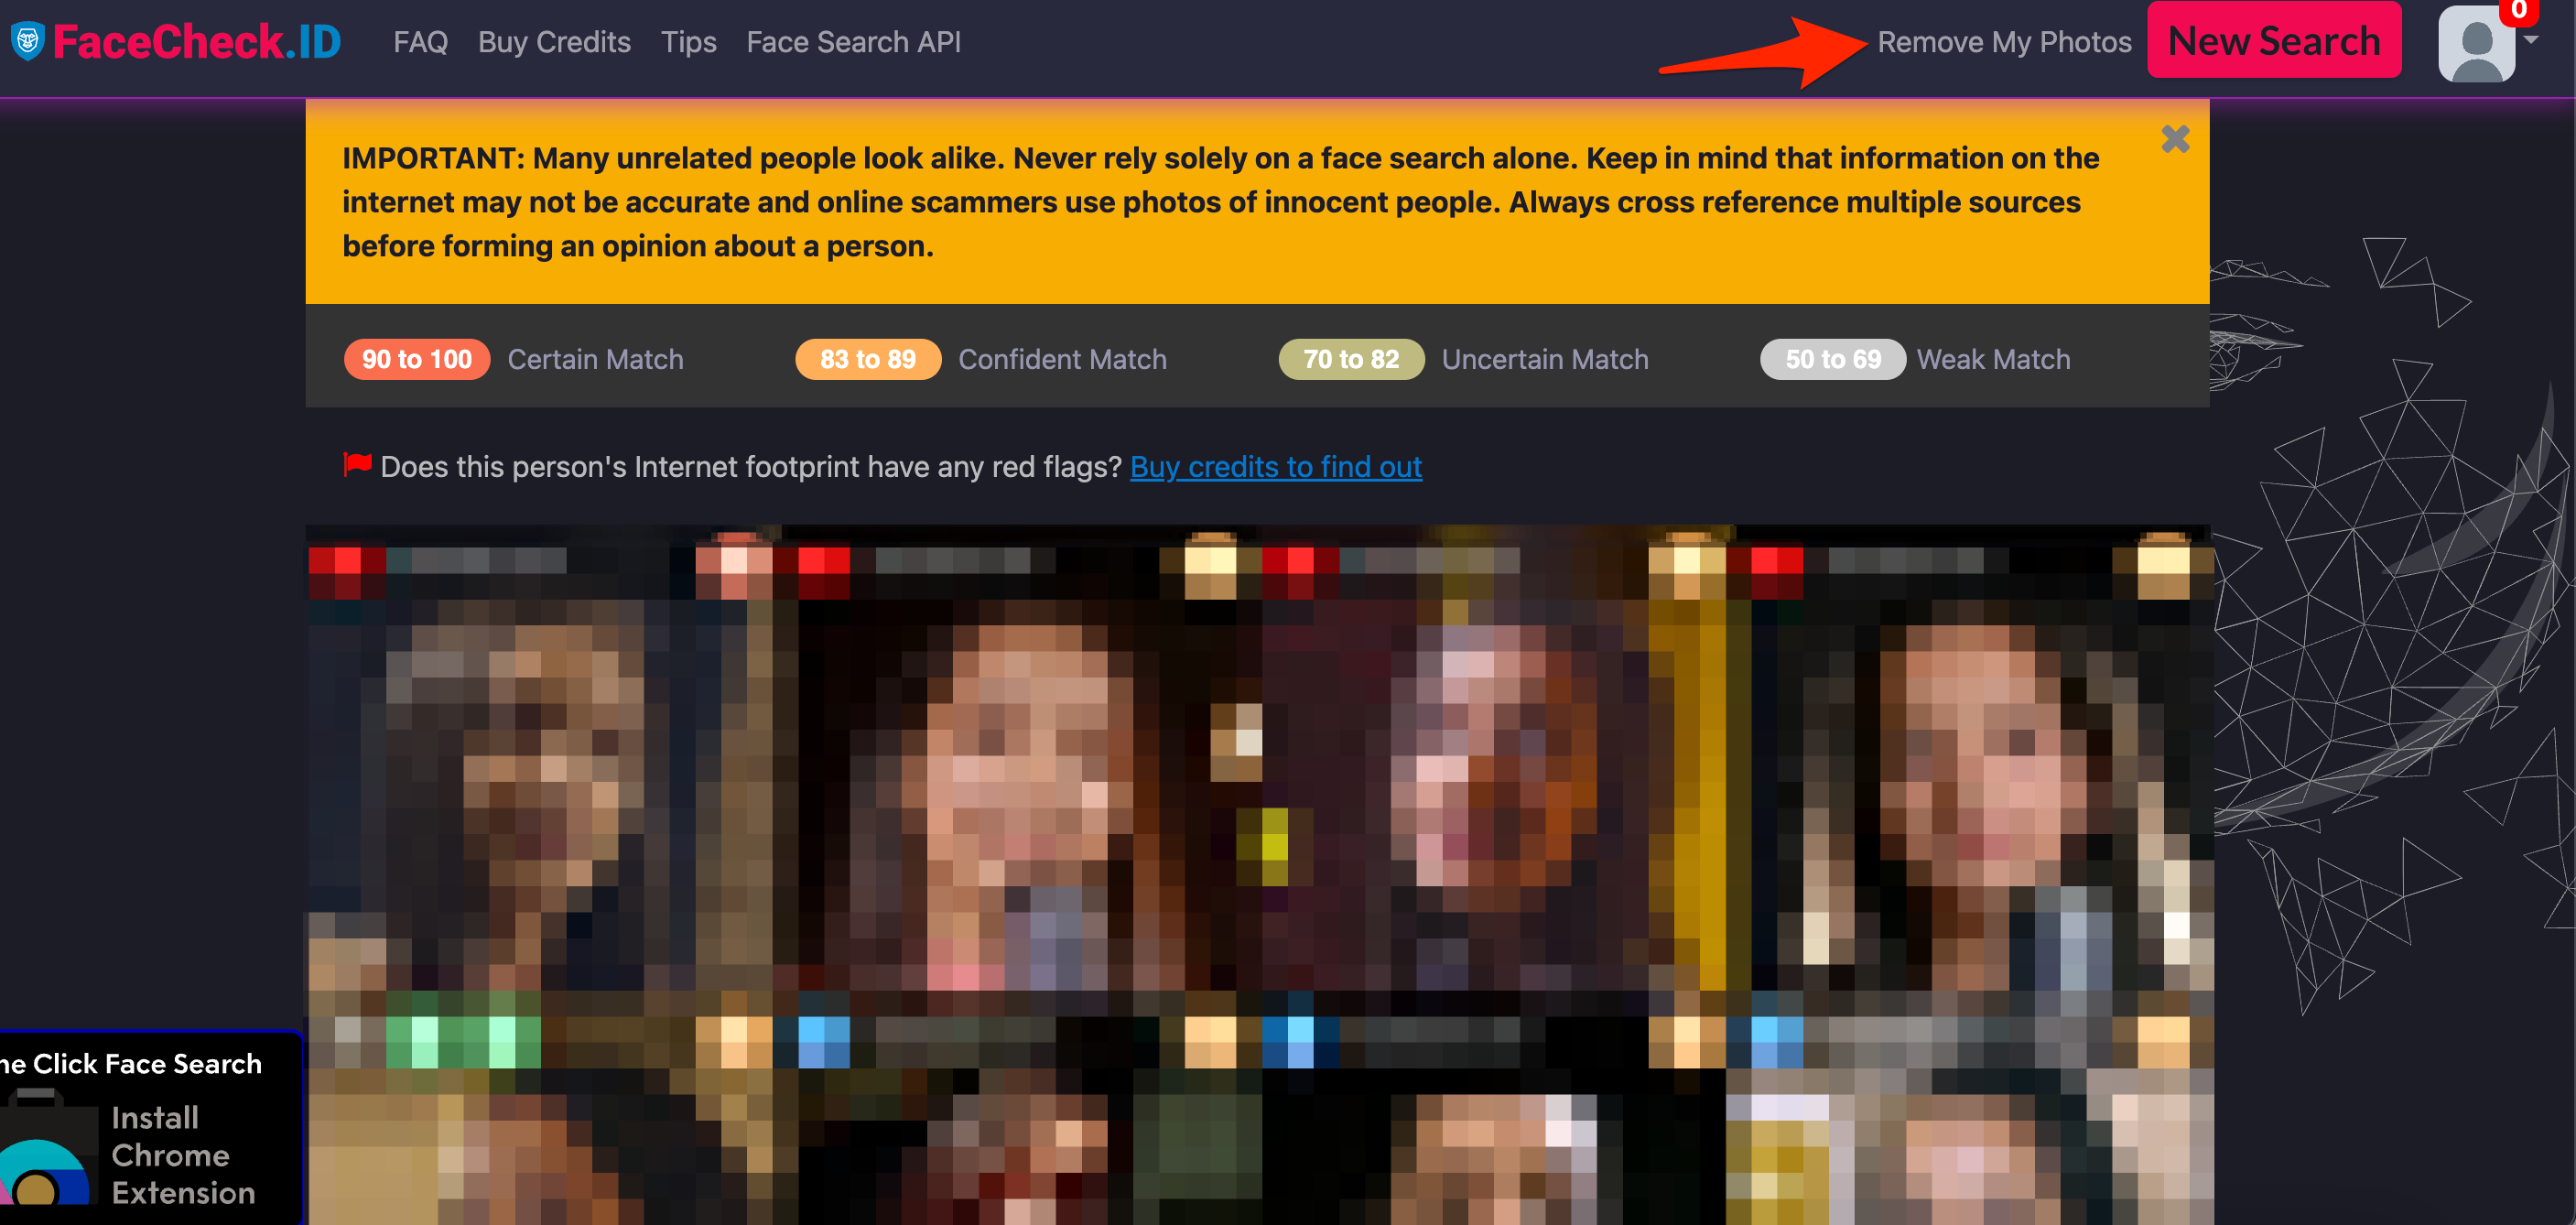 Remove Your Photos from the FaceCheck Search Engine